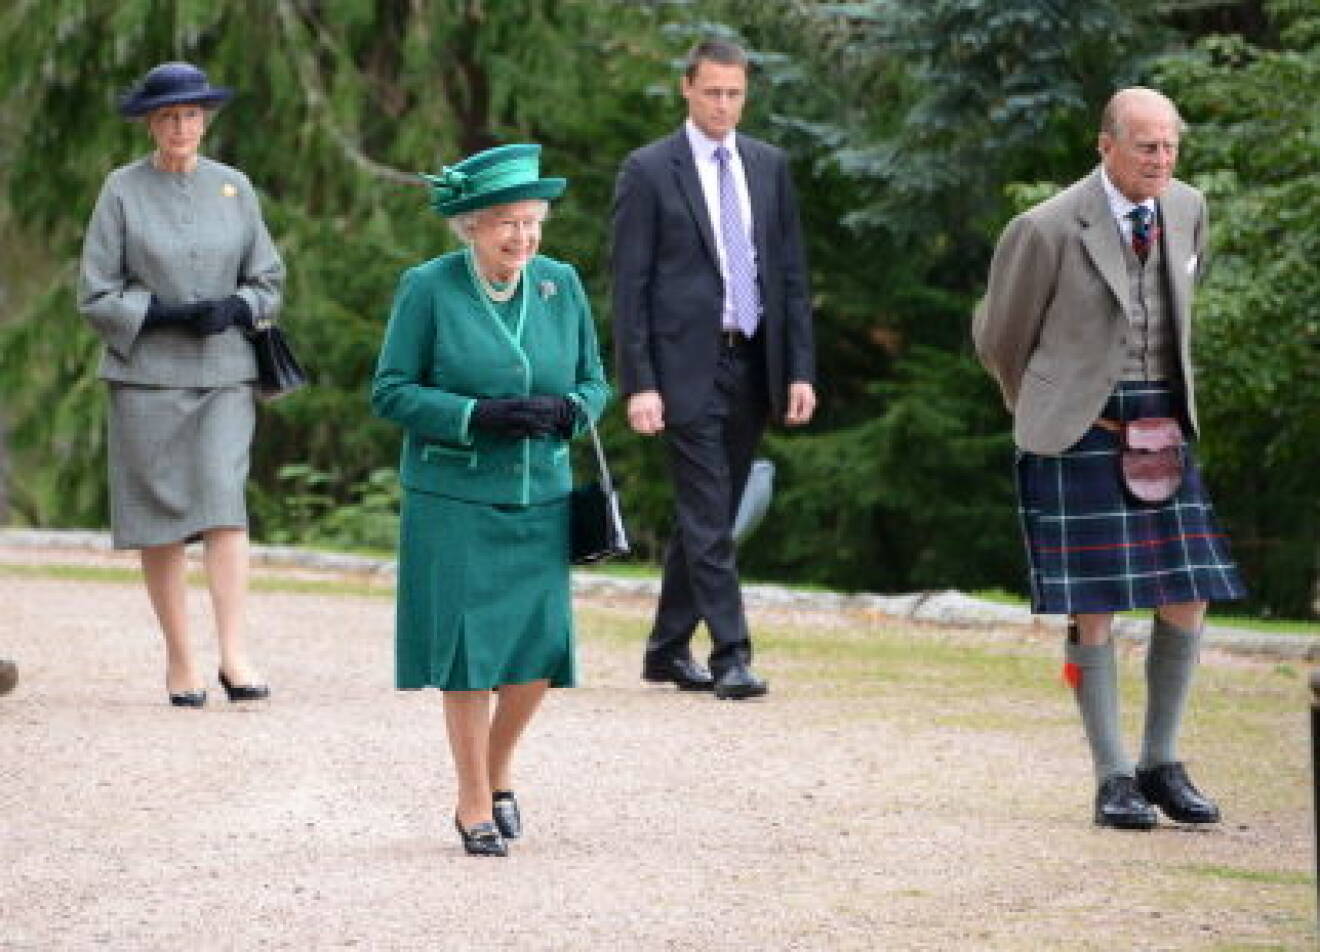 Queen Elizabeth II and Prince Philip, Duke of Edinburgh were introduced to a parishioner during their walkabout after morning service at Crathie Church in Aberdeenshire